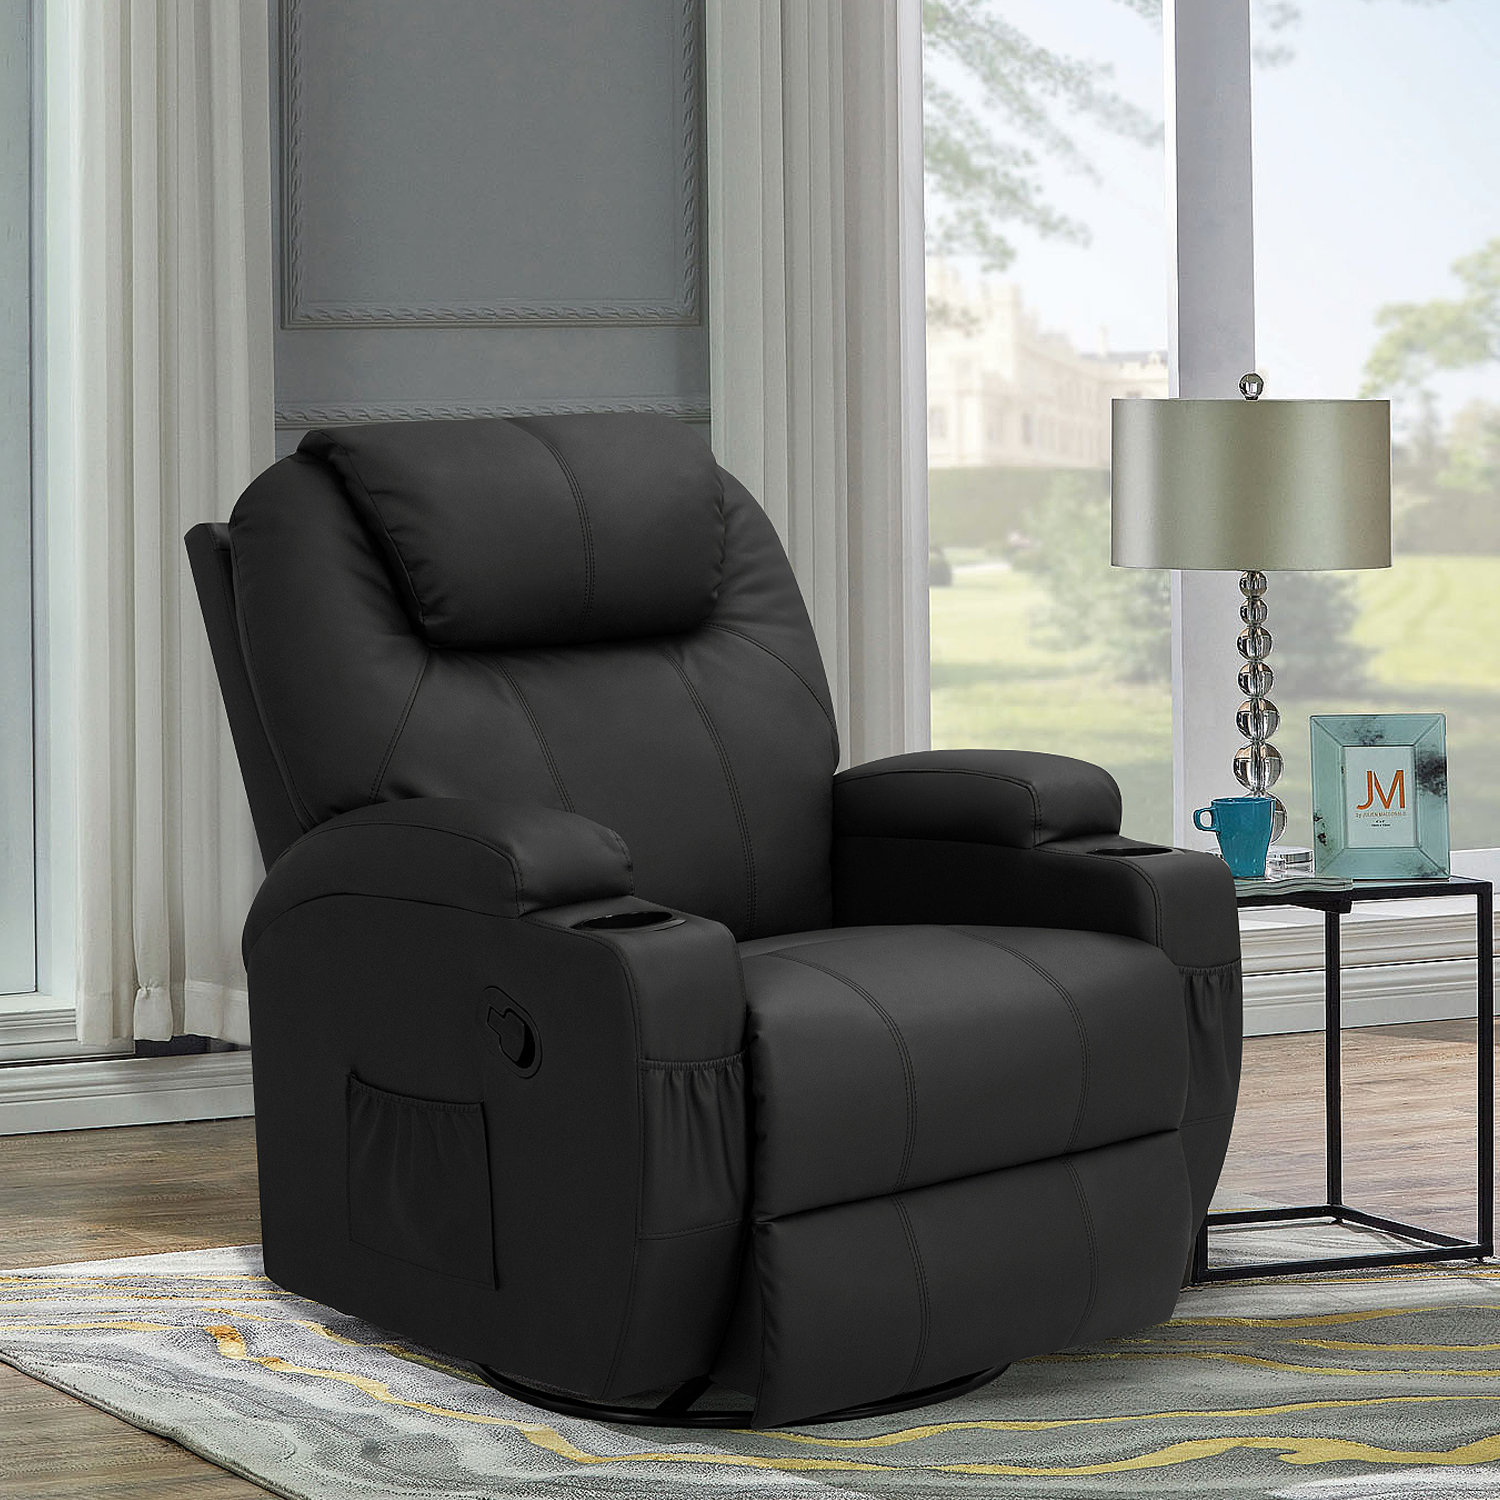 Winston Porter Faux Leather Reclining Heated Massage Chair And Reviews Wayfair